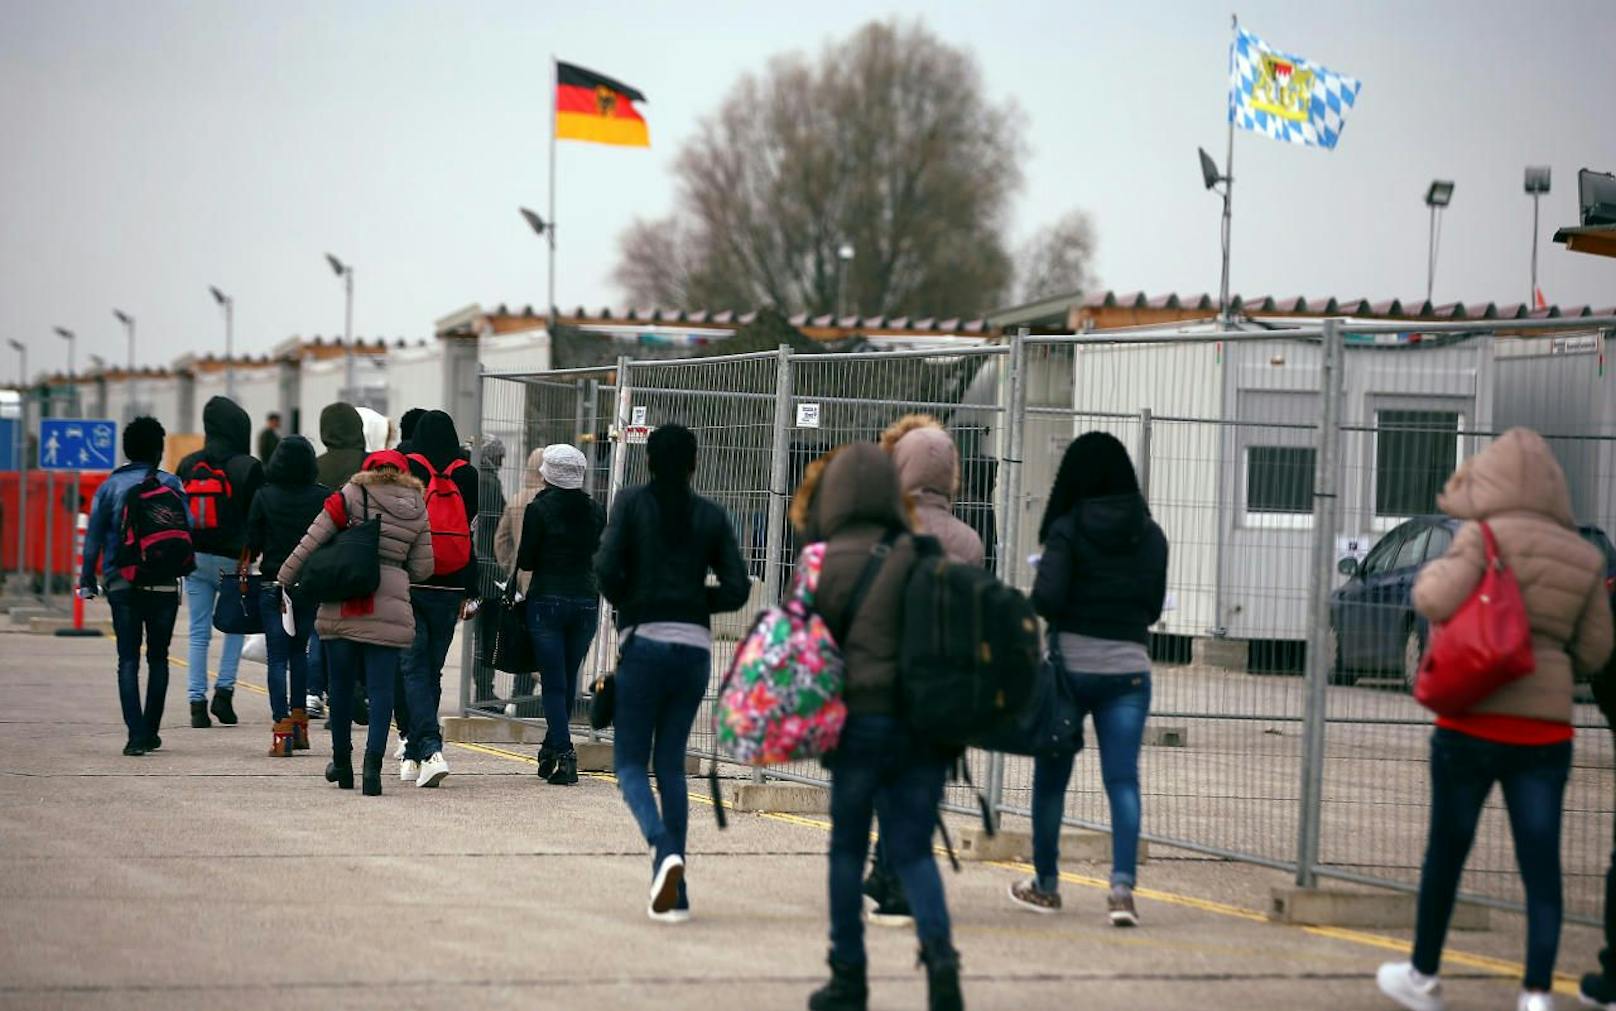 Eritrean migrants walk after arriving by plane from Italy at the first registration camp in Erding near Munich, Germany, November 15, 2016.  REUTERS/Michael Dalder - D1BEUMZGAGAB